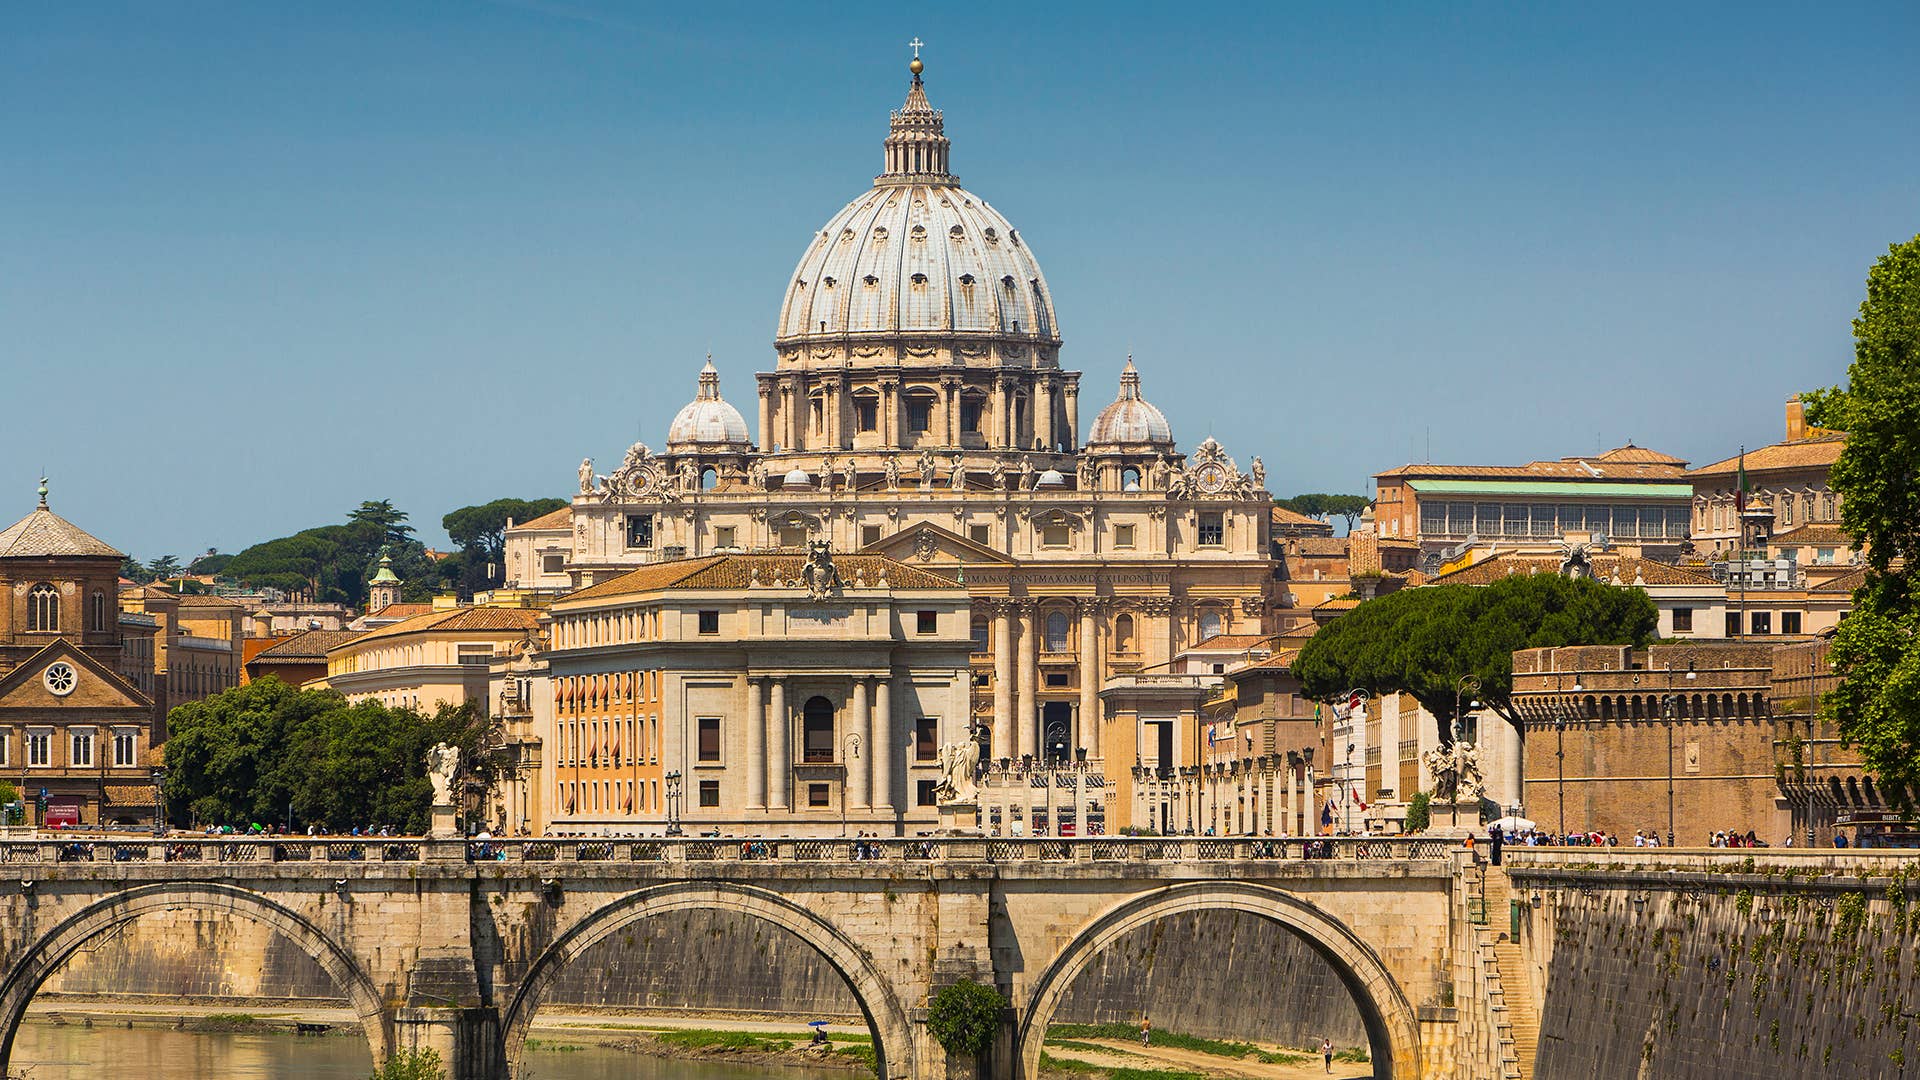 Vatican with the Tiber River and St. Peter's Basilica, Rome, Italy